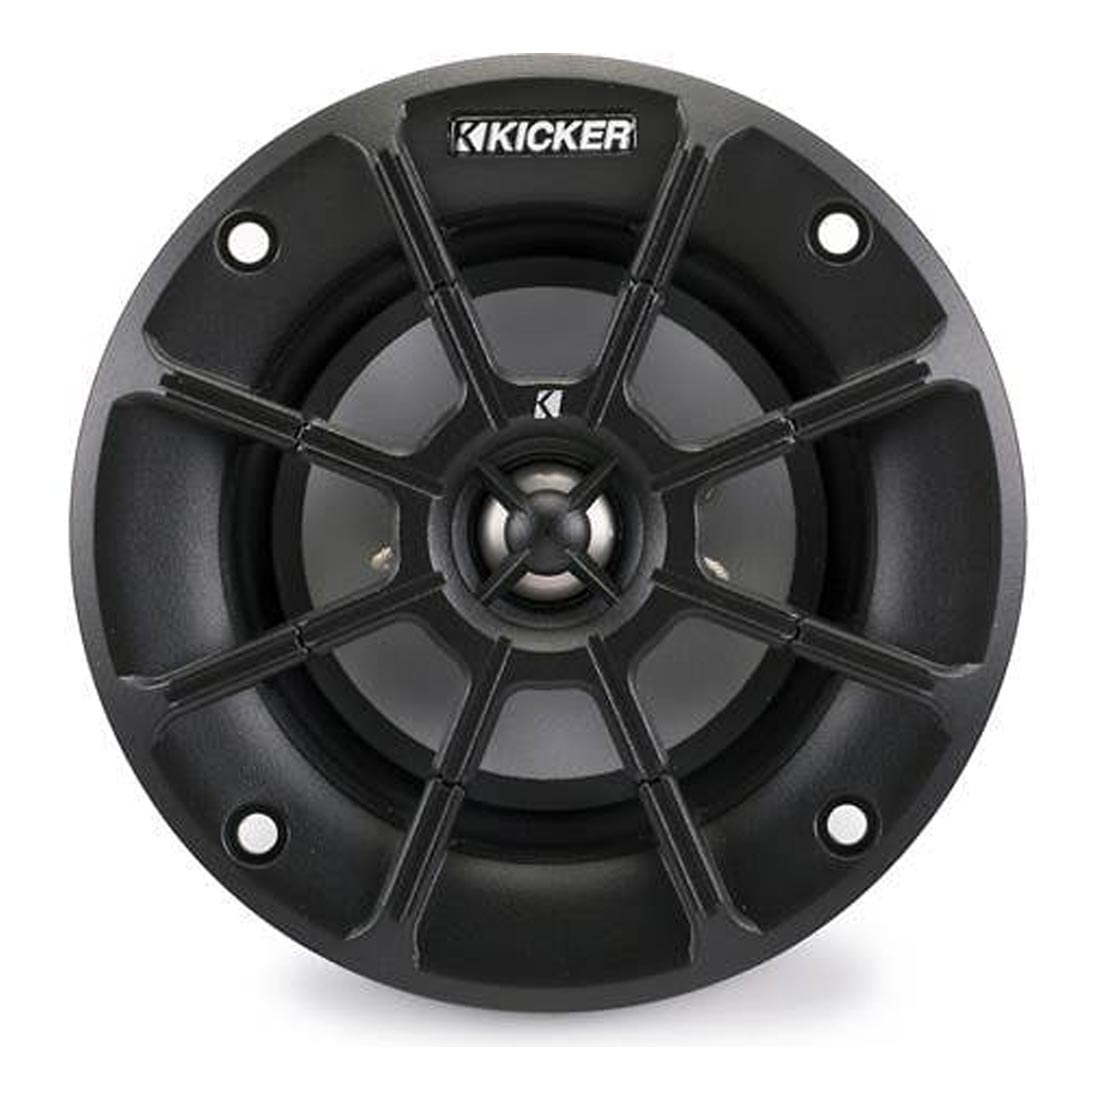 Kicker 40PS42 4" 2-Way 2-Ohm Speakers for Motorcycles, Boats, and ATVs